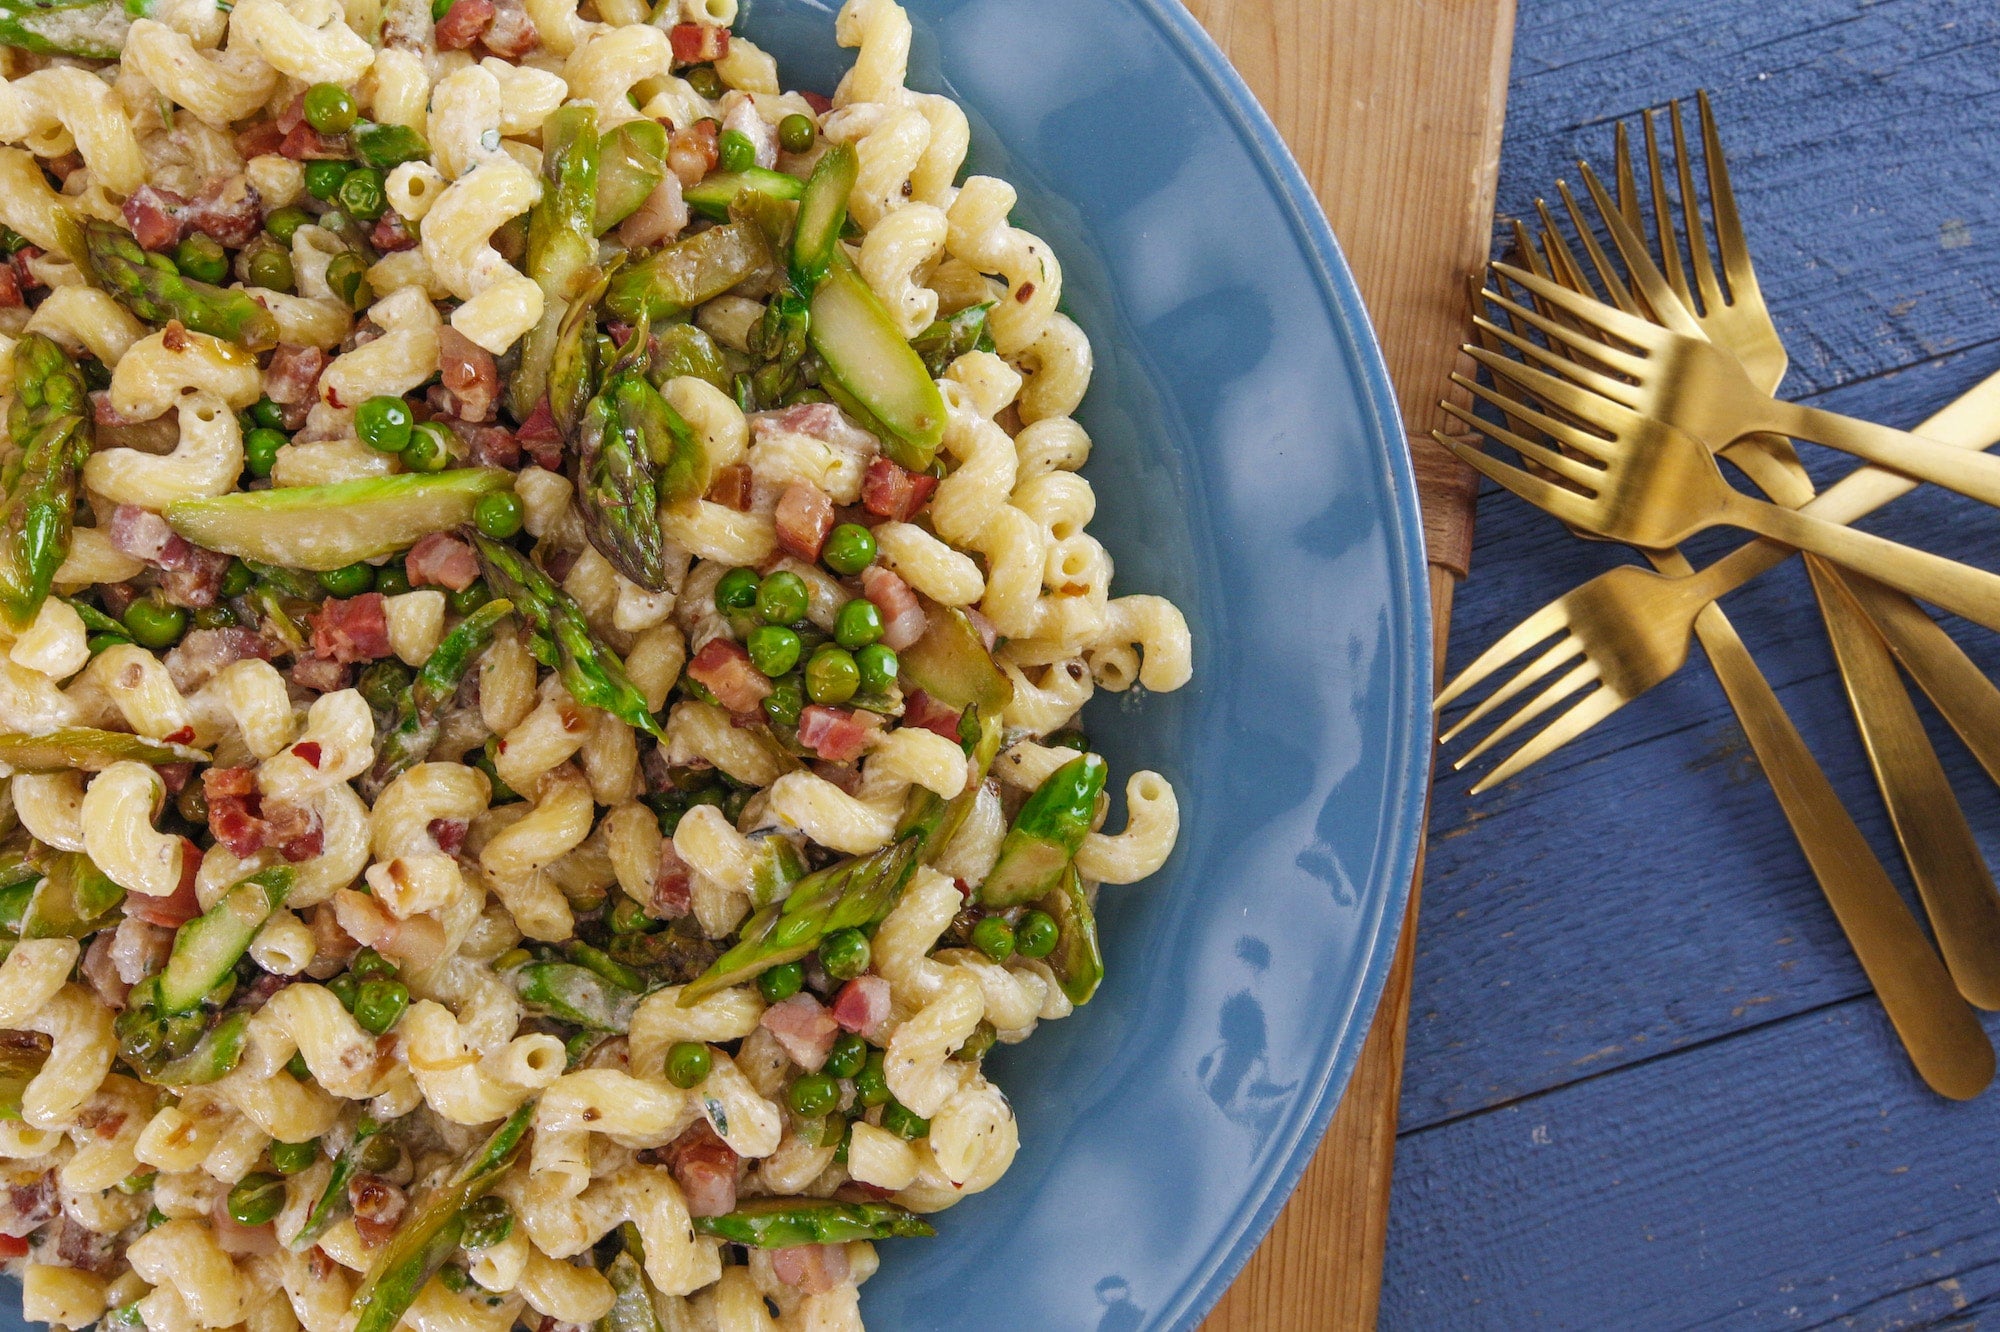 Rachael's Spring Pasta with Peas, Asparagus, Prosciutto and Onions